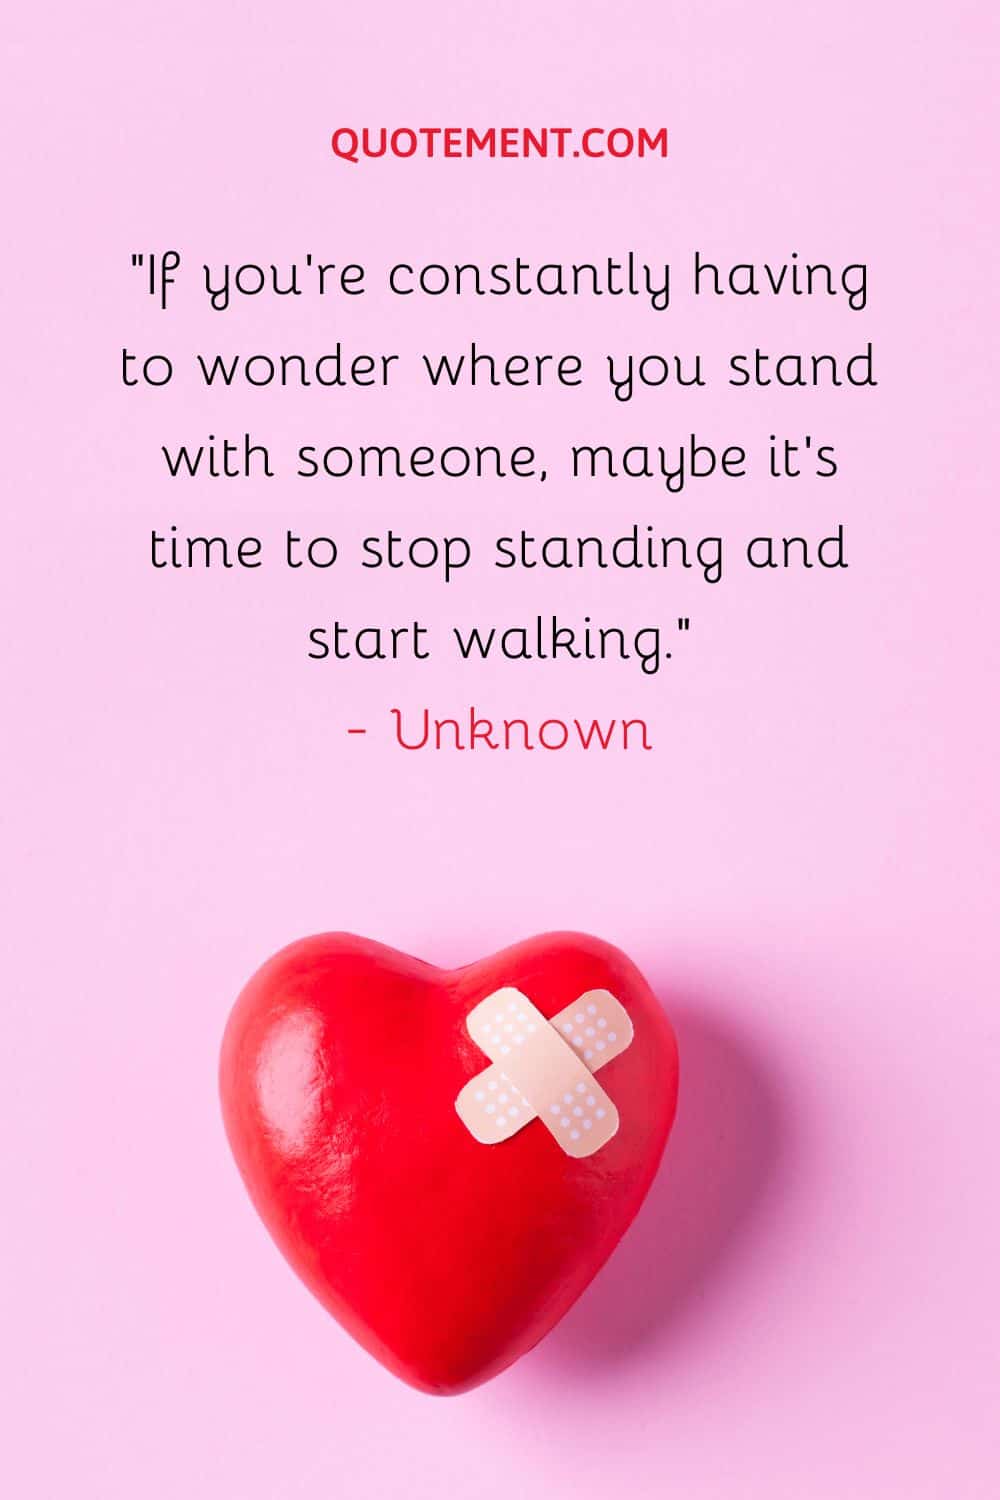 If you’re constantly having to wonder where you stand with someone, maybe it’s time to stop standing and start walking